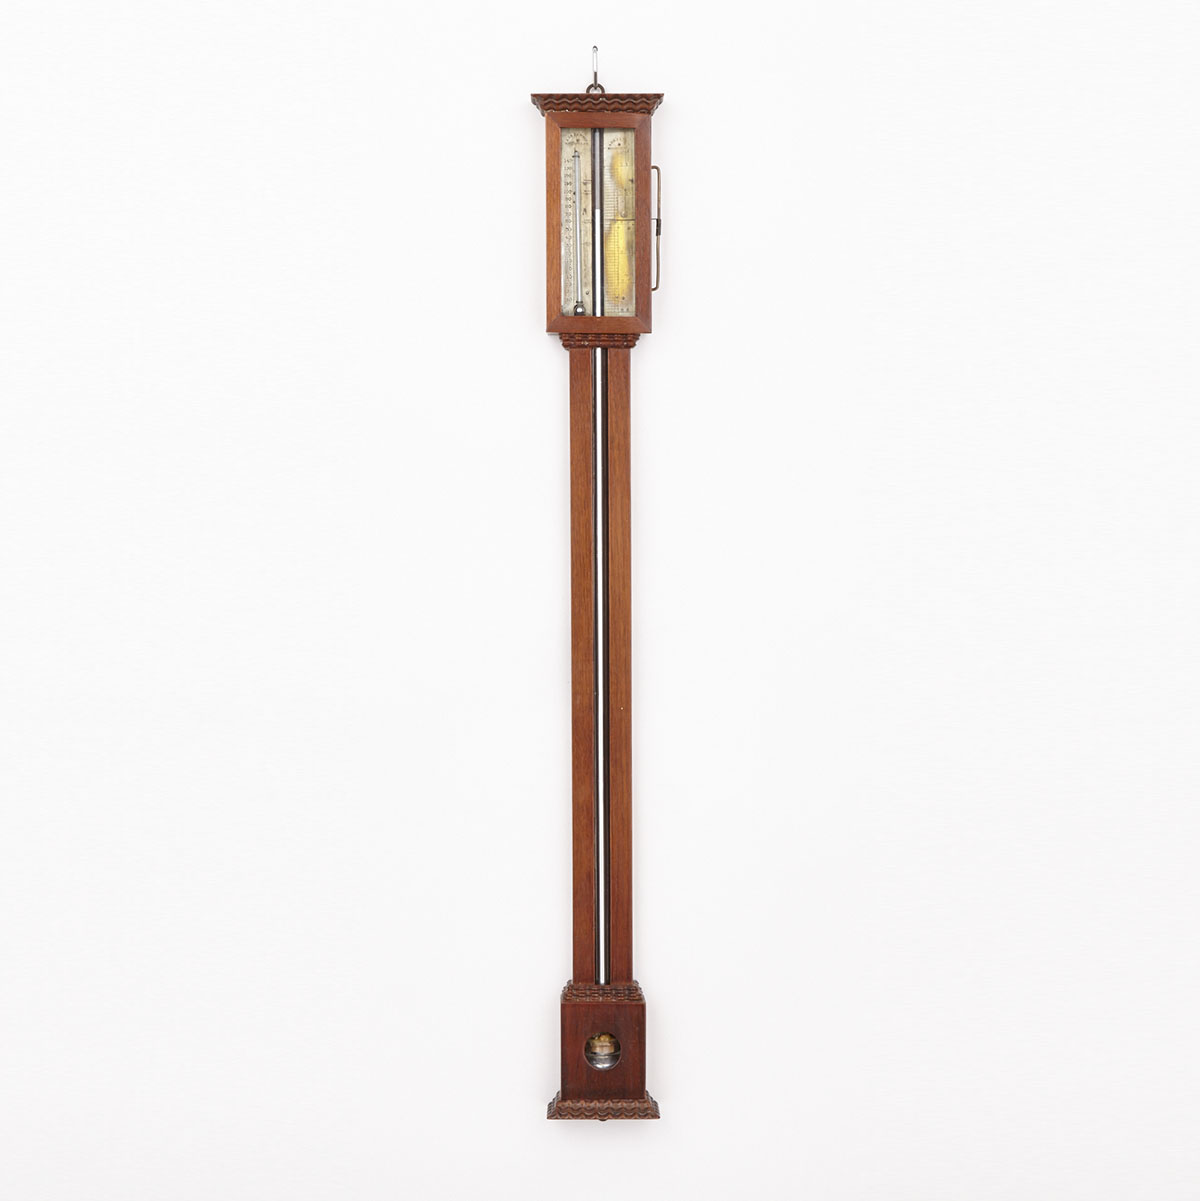 American Mahogany Stick Barometer, A.S. & J.A. West, Rochester, N.Y., c. 1850